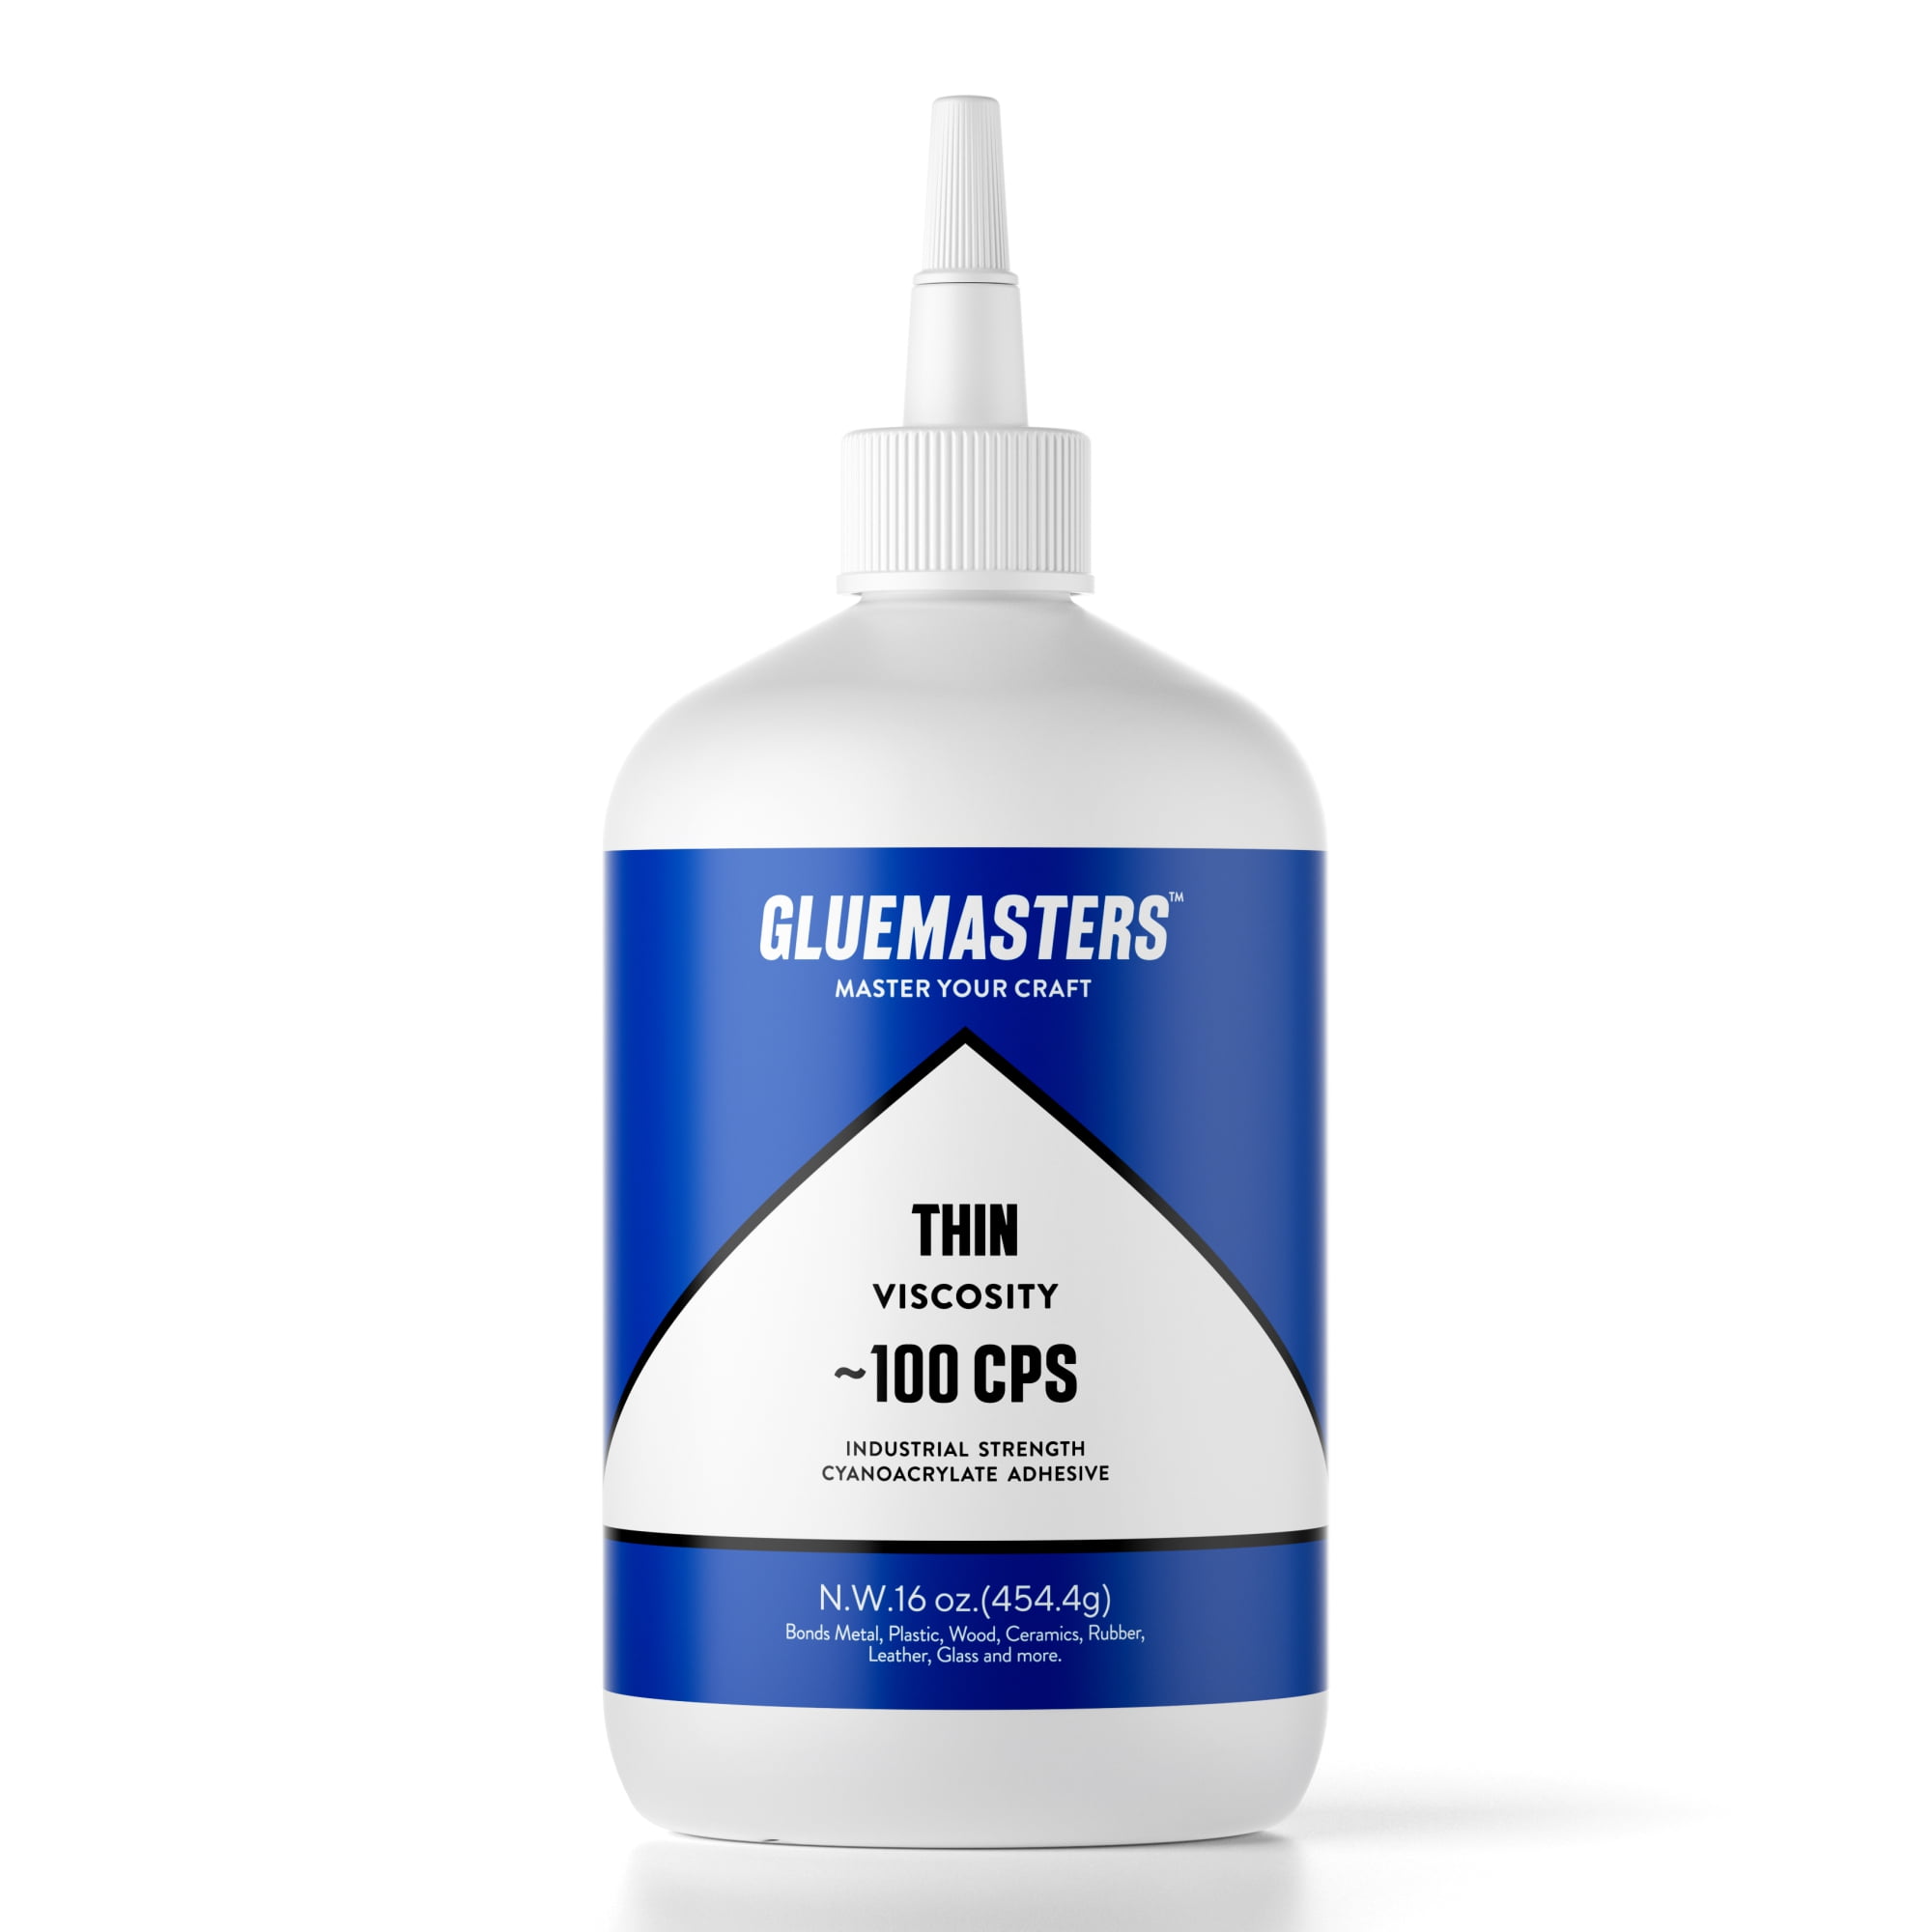  Toy Glue 20g,Craft Glue,Toy Craft Glue Quick Dry Clear,Instant  Super Glue for Toy,Toy Model,Craft,DIY,Metal, Plastic, Rubber, Wood,  Leather,Card Making,Photo,Model,Decor,Crystal,Scrapbooking : Arts, Crafts &  Sewing